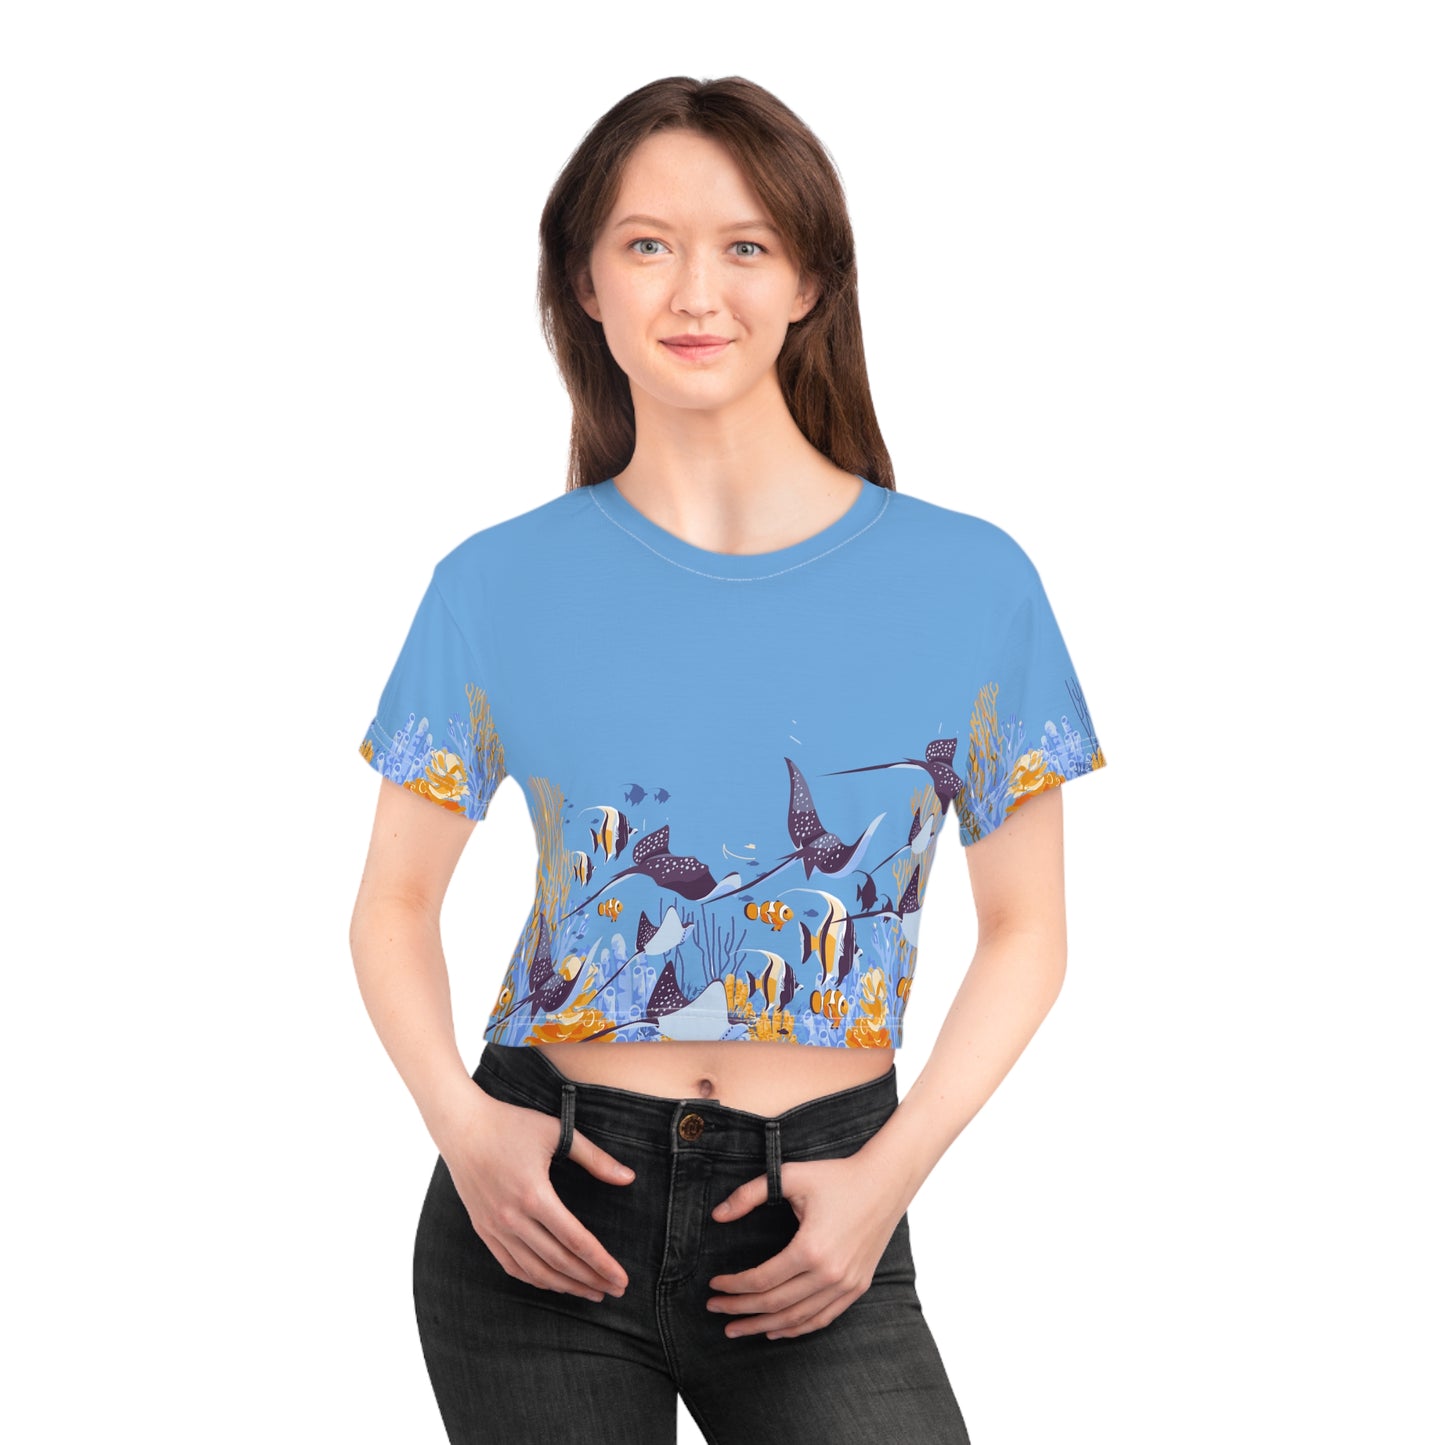 Underwater World - Crop Tees For You